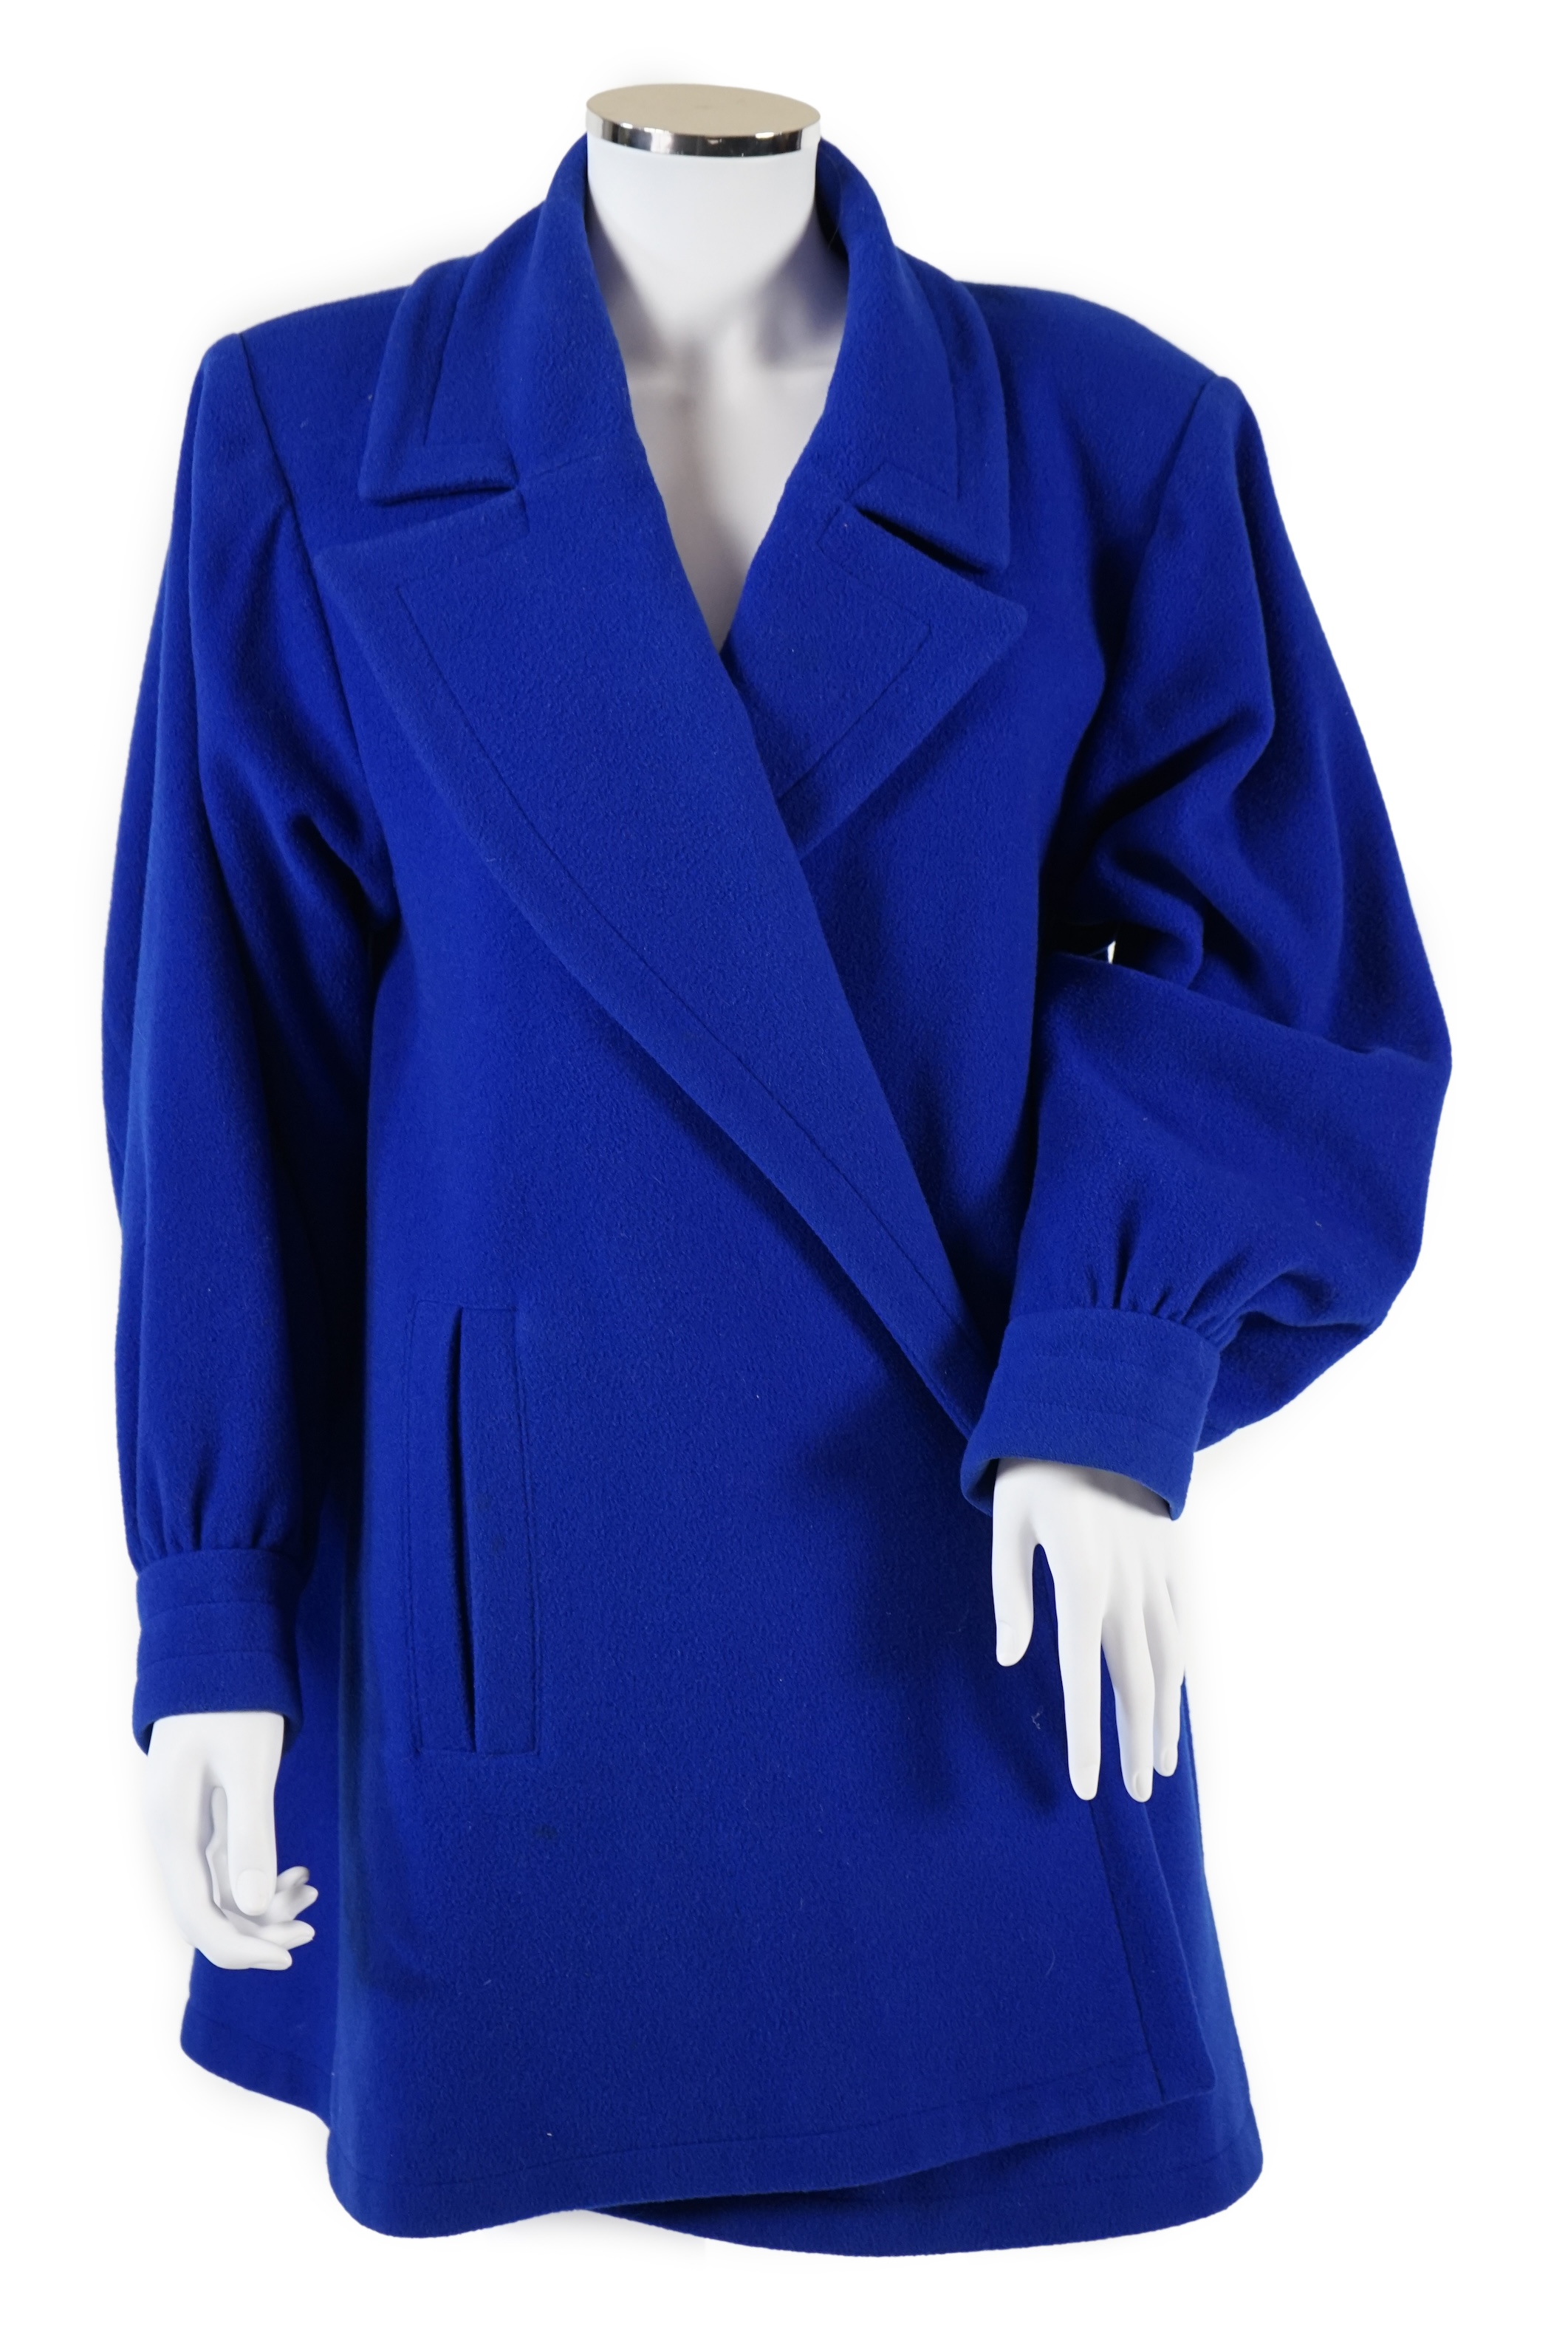 A vintage Yves Saint Laurent variation lady's royal blue wool coat, F 38 (UK 10). Proceeds to Happy Paws Puppy Rescue